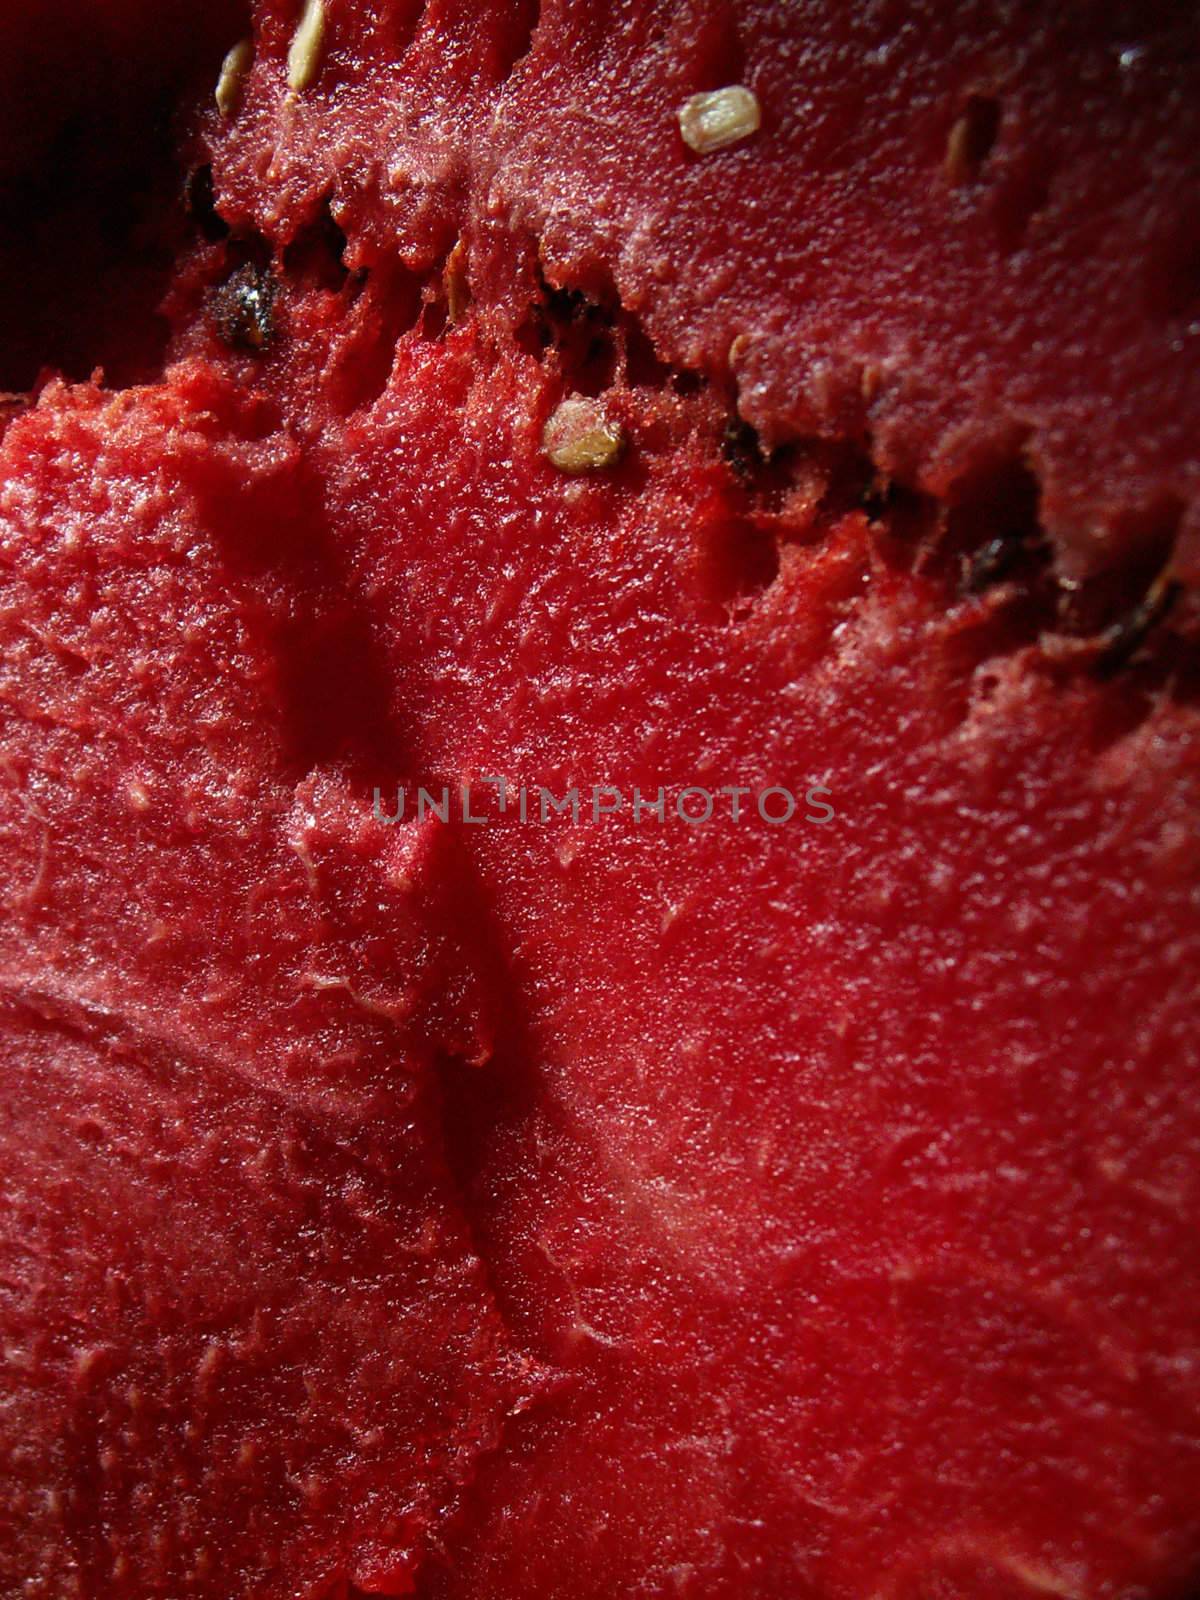 Water melon by sarkao